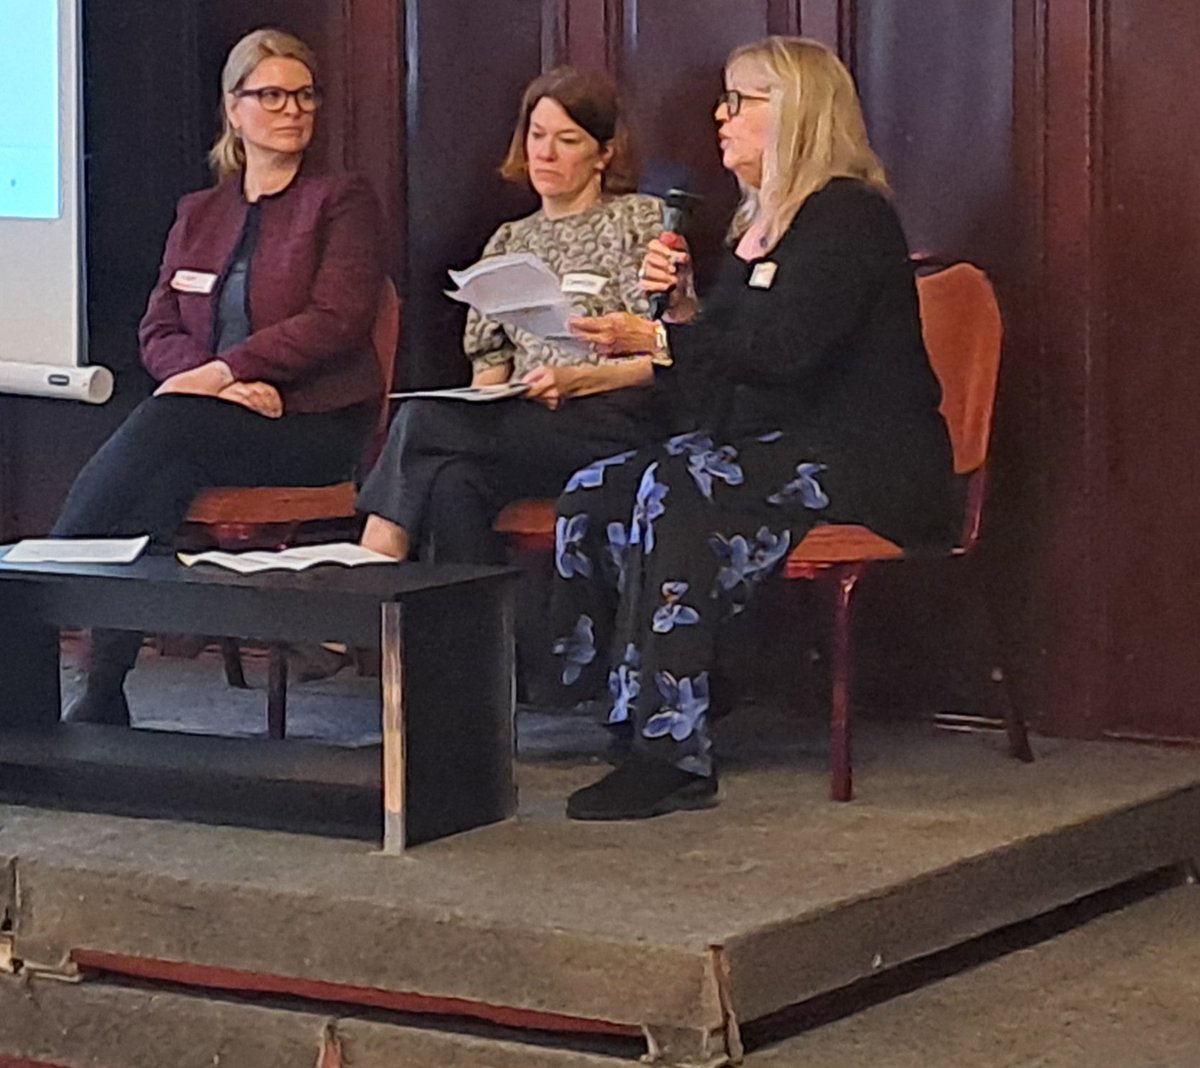 Consistent messages from international panel about what support children need after abuse  at @uoessps Making Sense of #BairnsHoose seminar today - safety, belief, empathy, respect, support for wider family. Silvie Bovarnick  @CamilleLW Ramona Alaggia